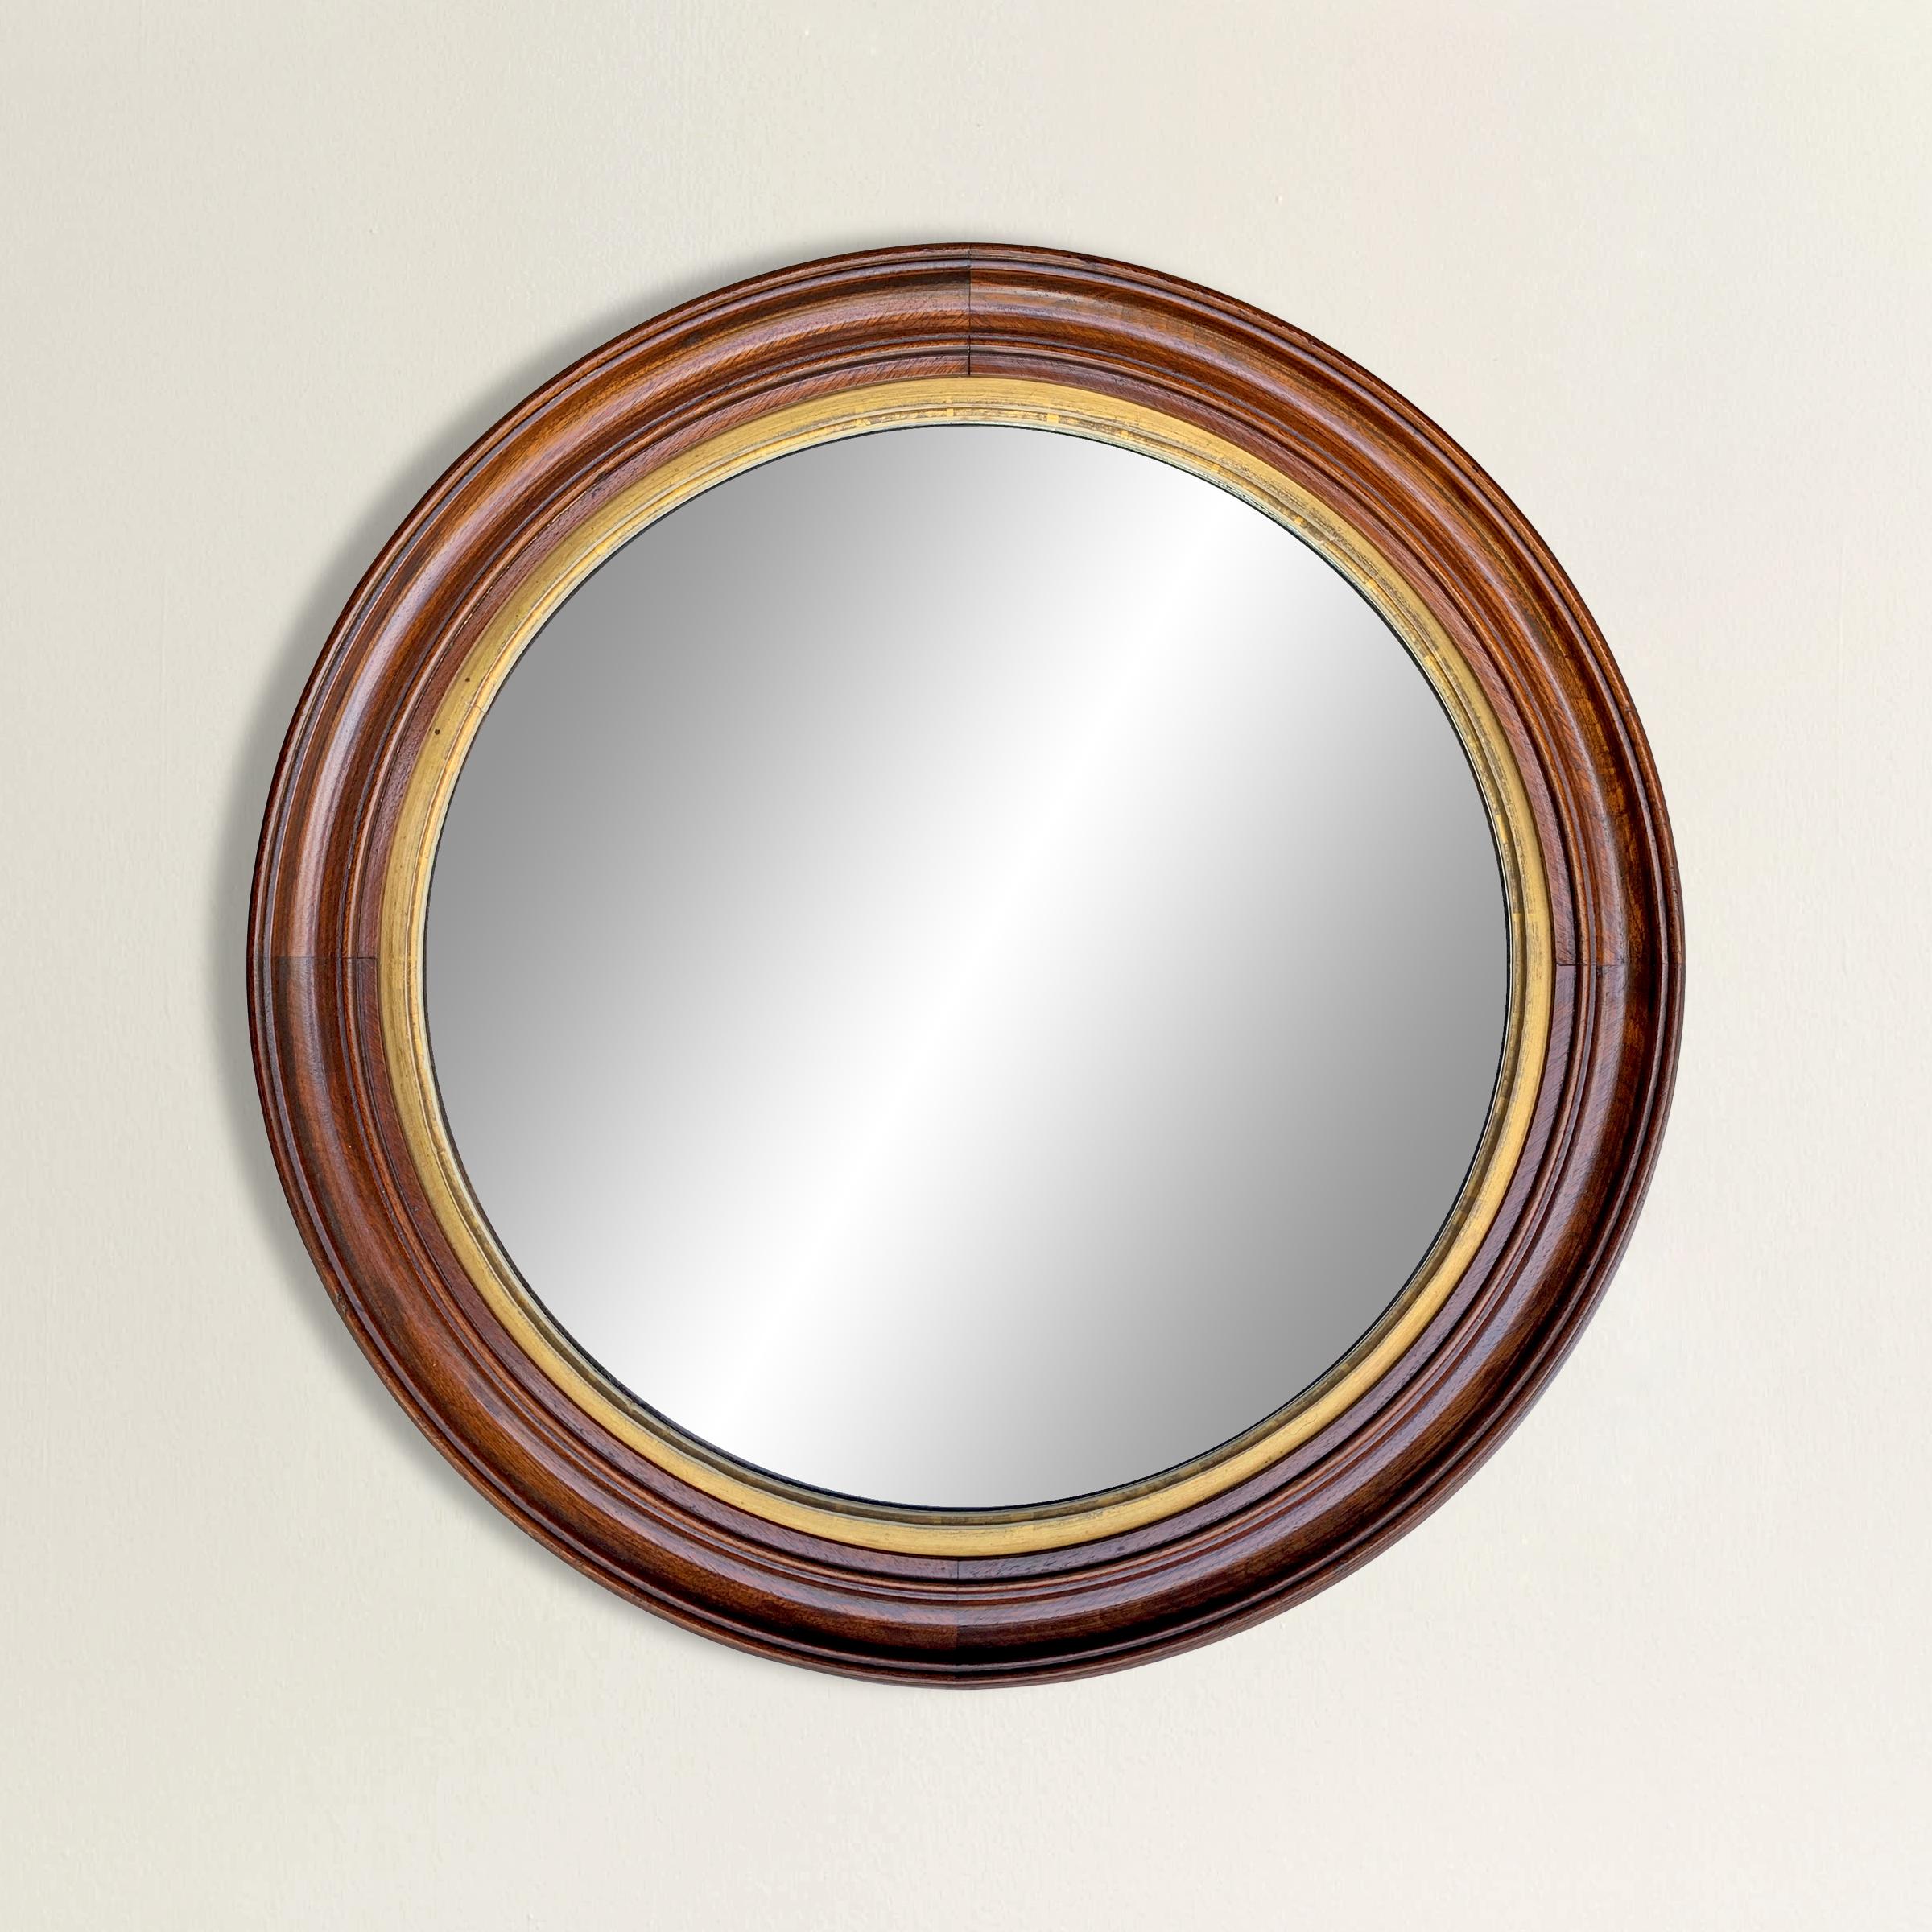 A striking late 19th century American mahogany framed round mirror with a gold leaf fillet and a wonderful deep cut sculptural frame profile.